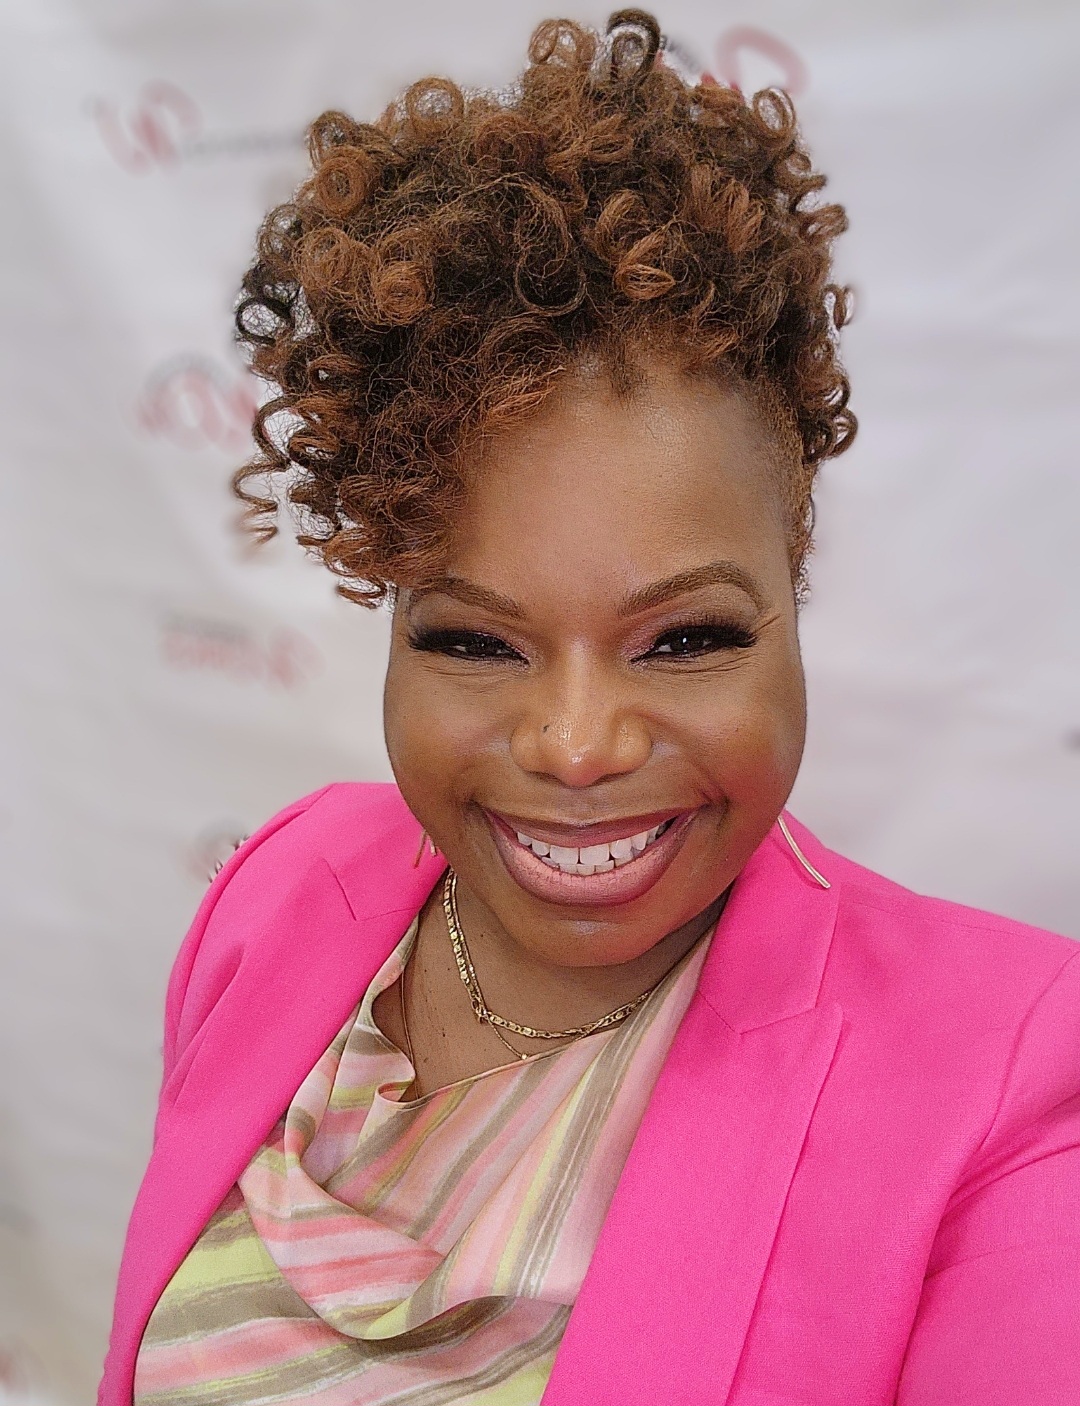 diya wynn wearing a pink blazer and striped colorful top smiling at the camera